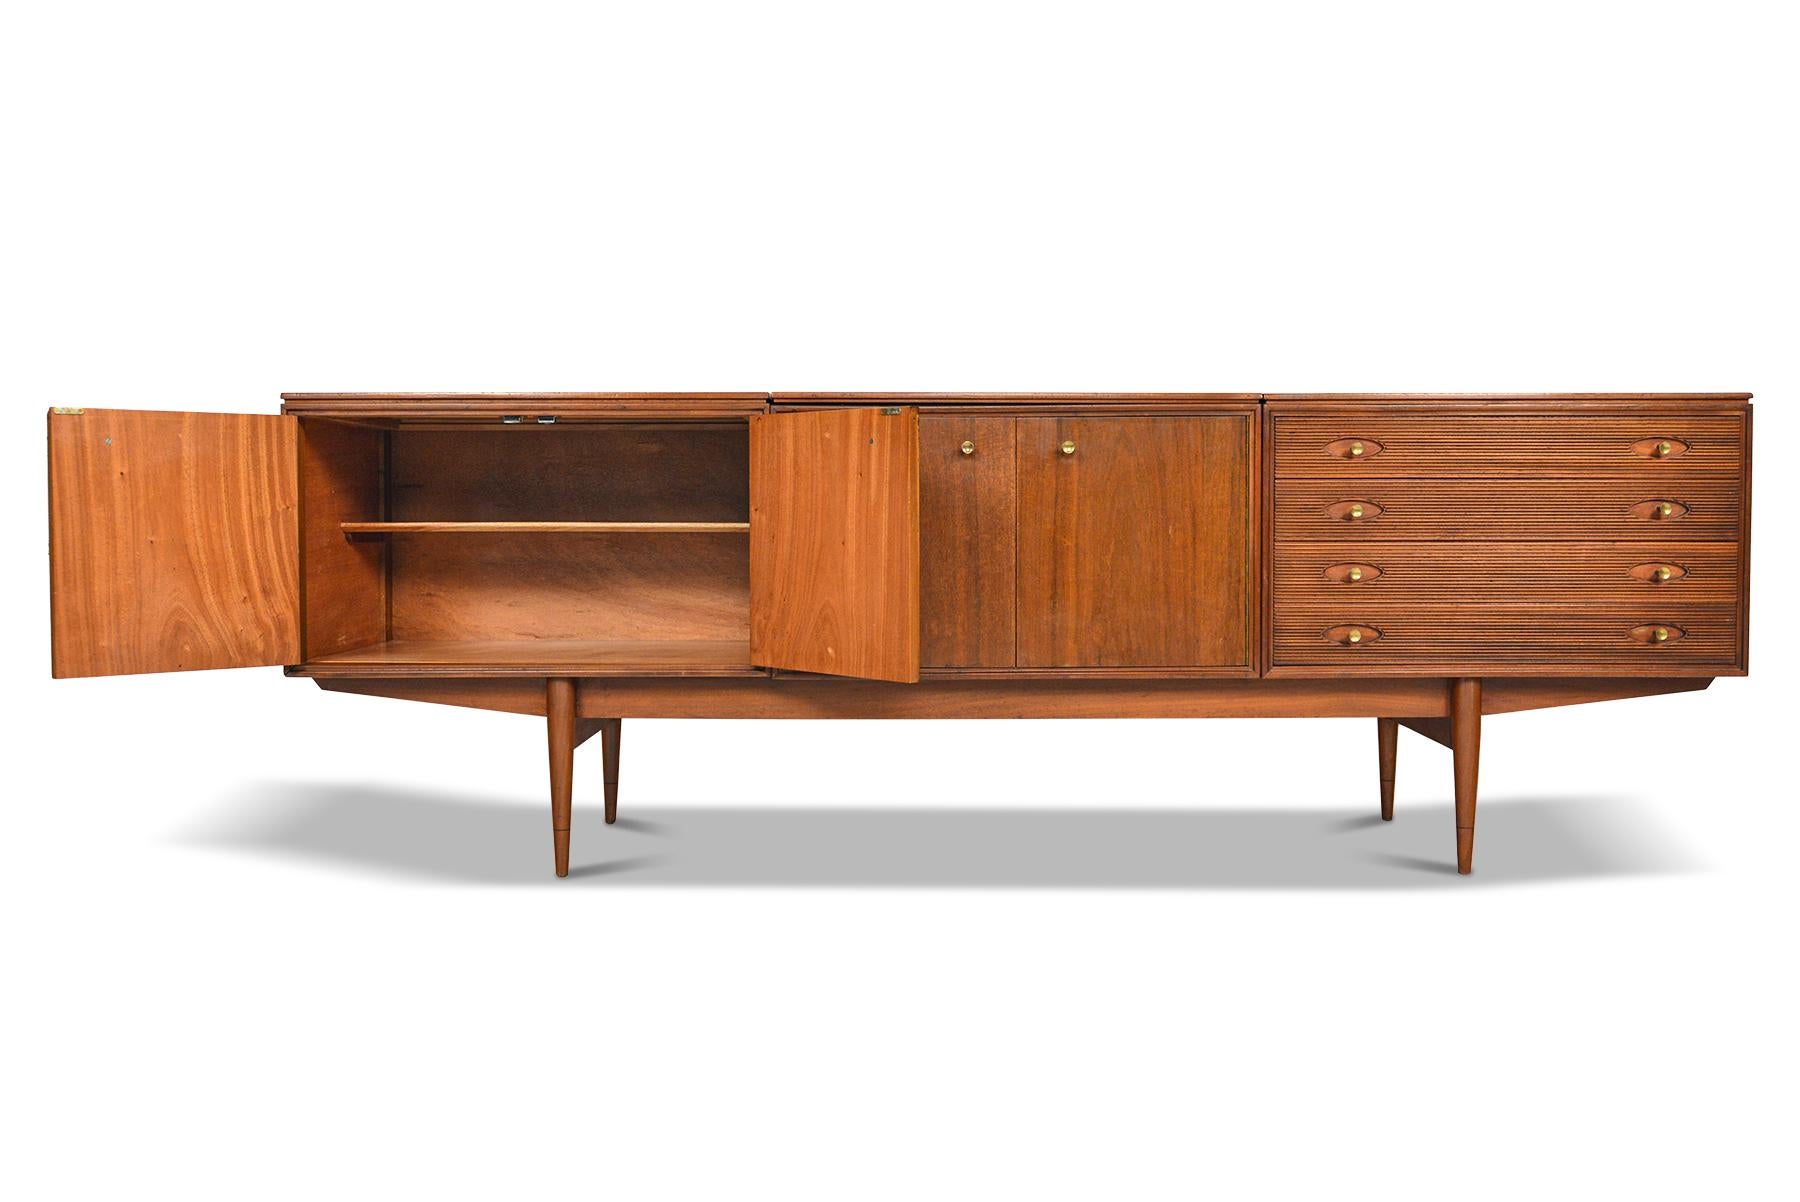 This long English modern credenza was designed by Robert Heritage for Archie Shine Furniture in 1957. Known as the “Hamilton” model, this beautiful piece is cased in mahogany with a curved lip in the back. An extremely unusual example of this model,